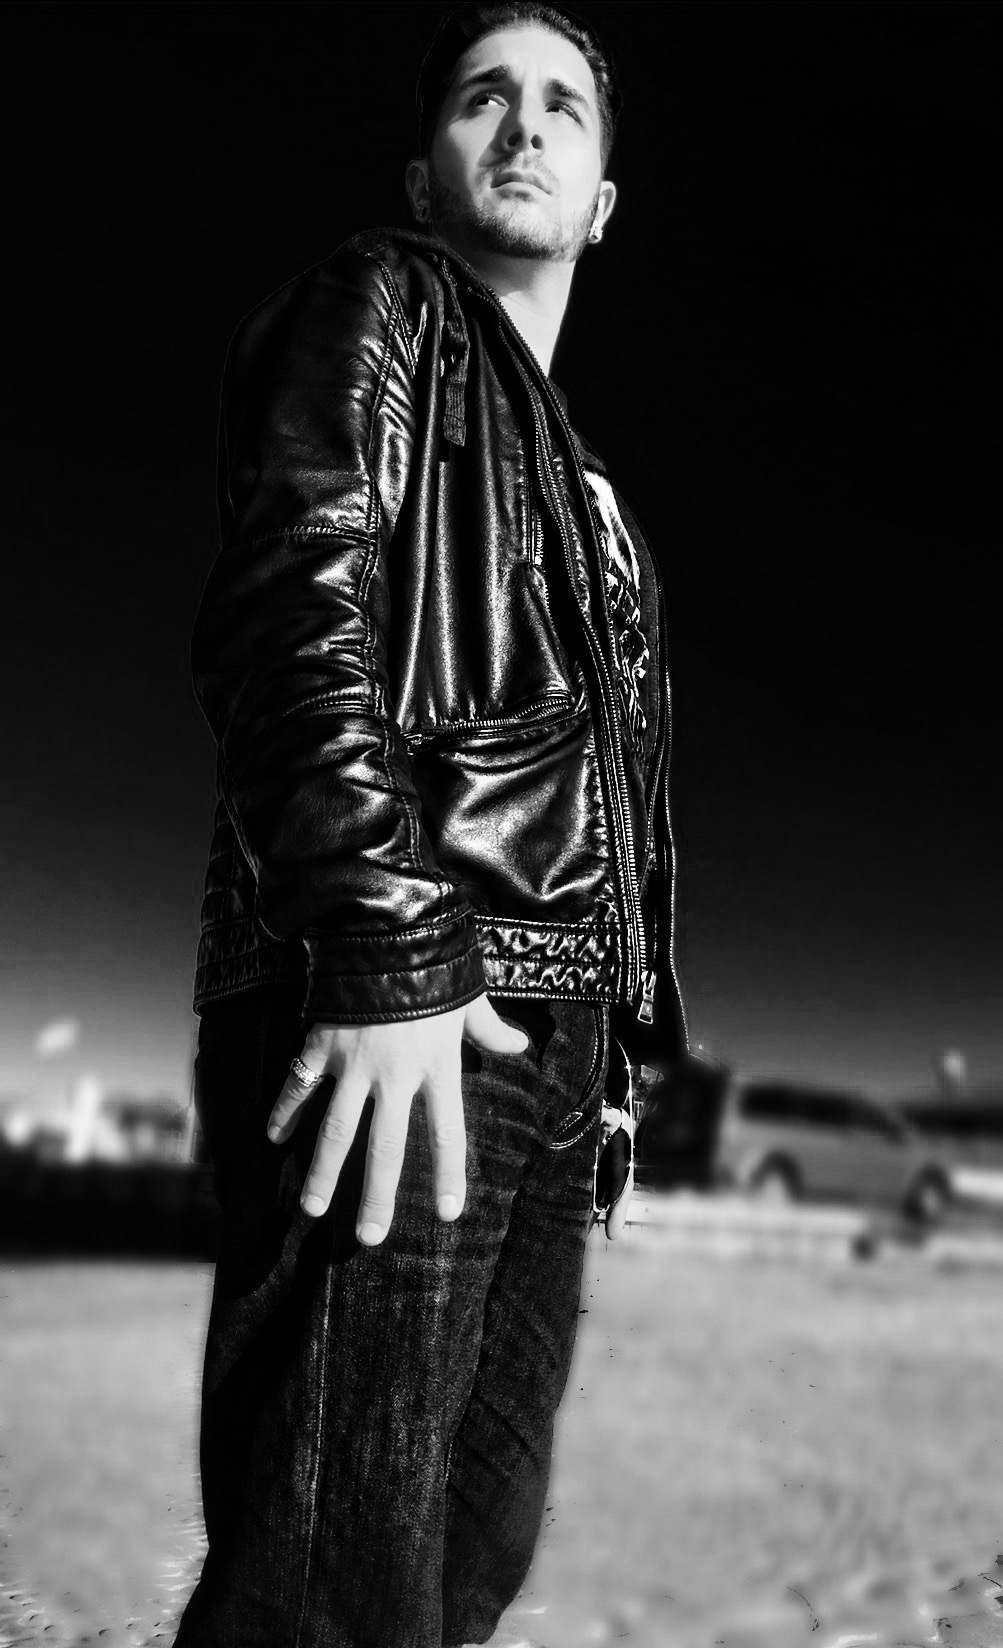 Another photo Shoot Sin City a look-a-Like Black & White